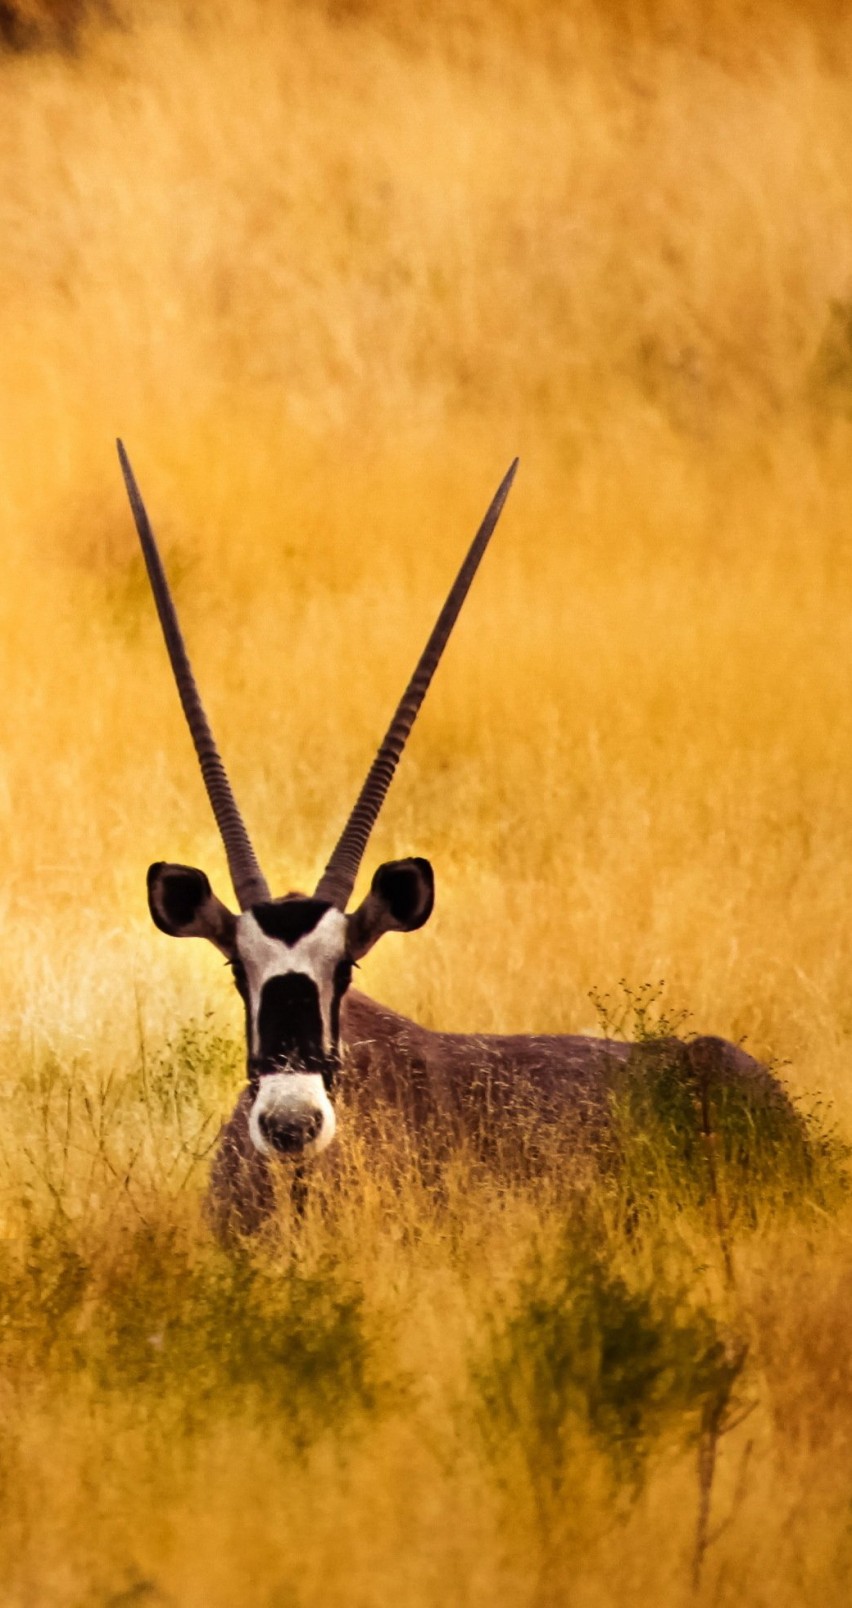 Antelope In The Savanna Wallpaper for Apple iPhone 6 / 6s